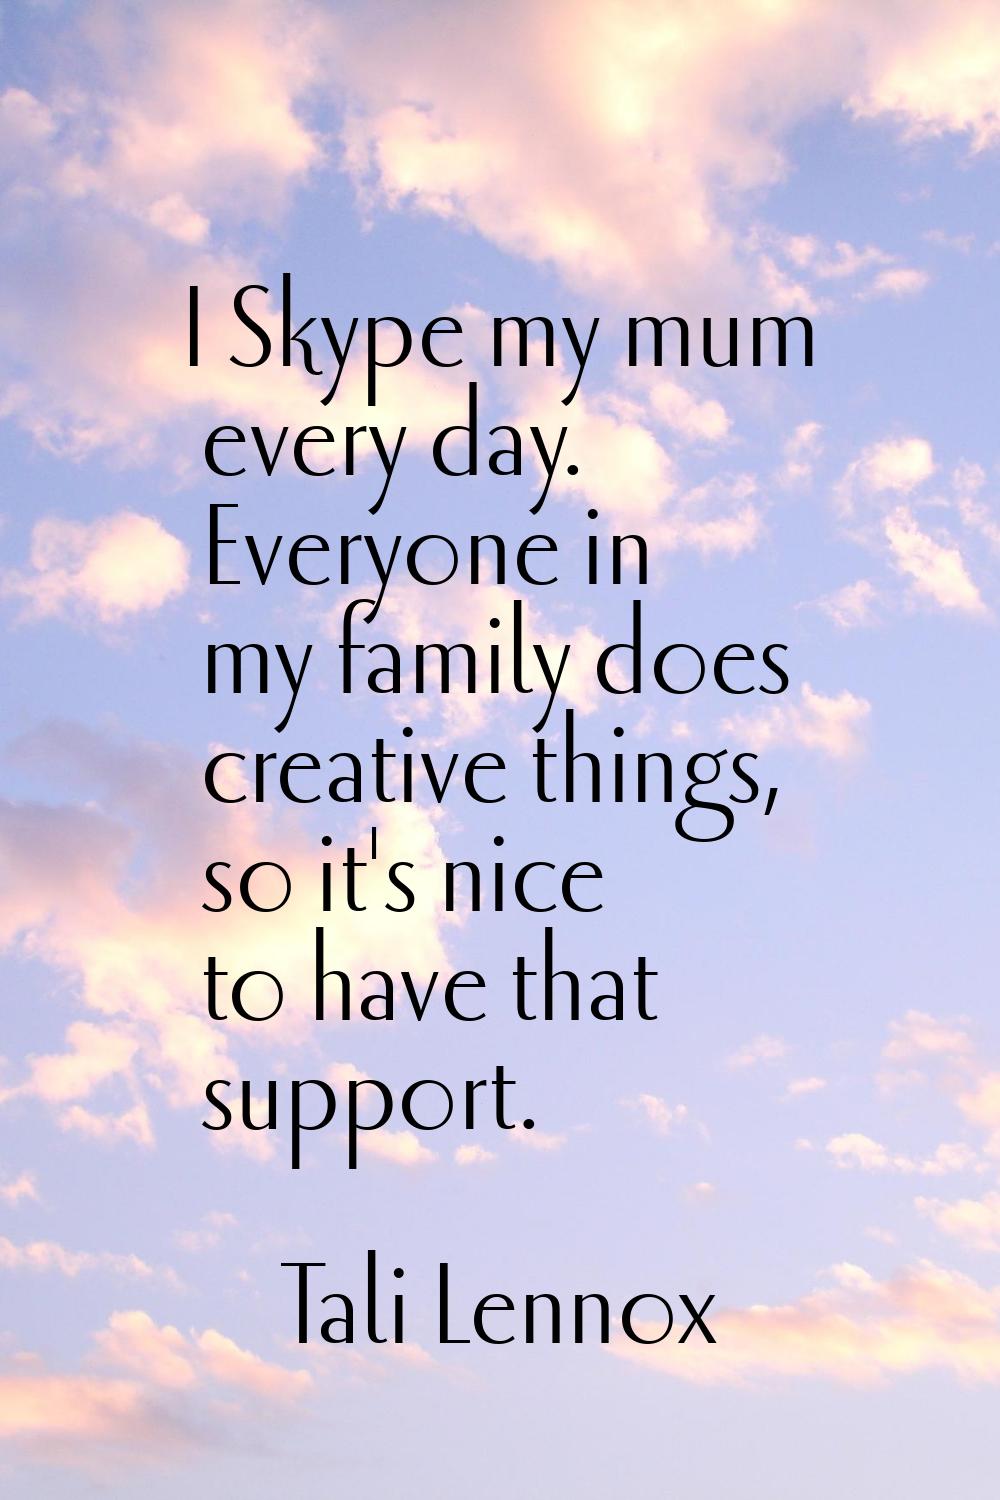 I Skype my mum every day. Everyone in my family does creative things, so it's nice to have that sup